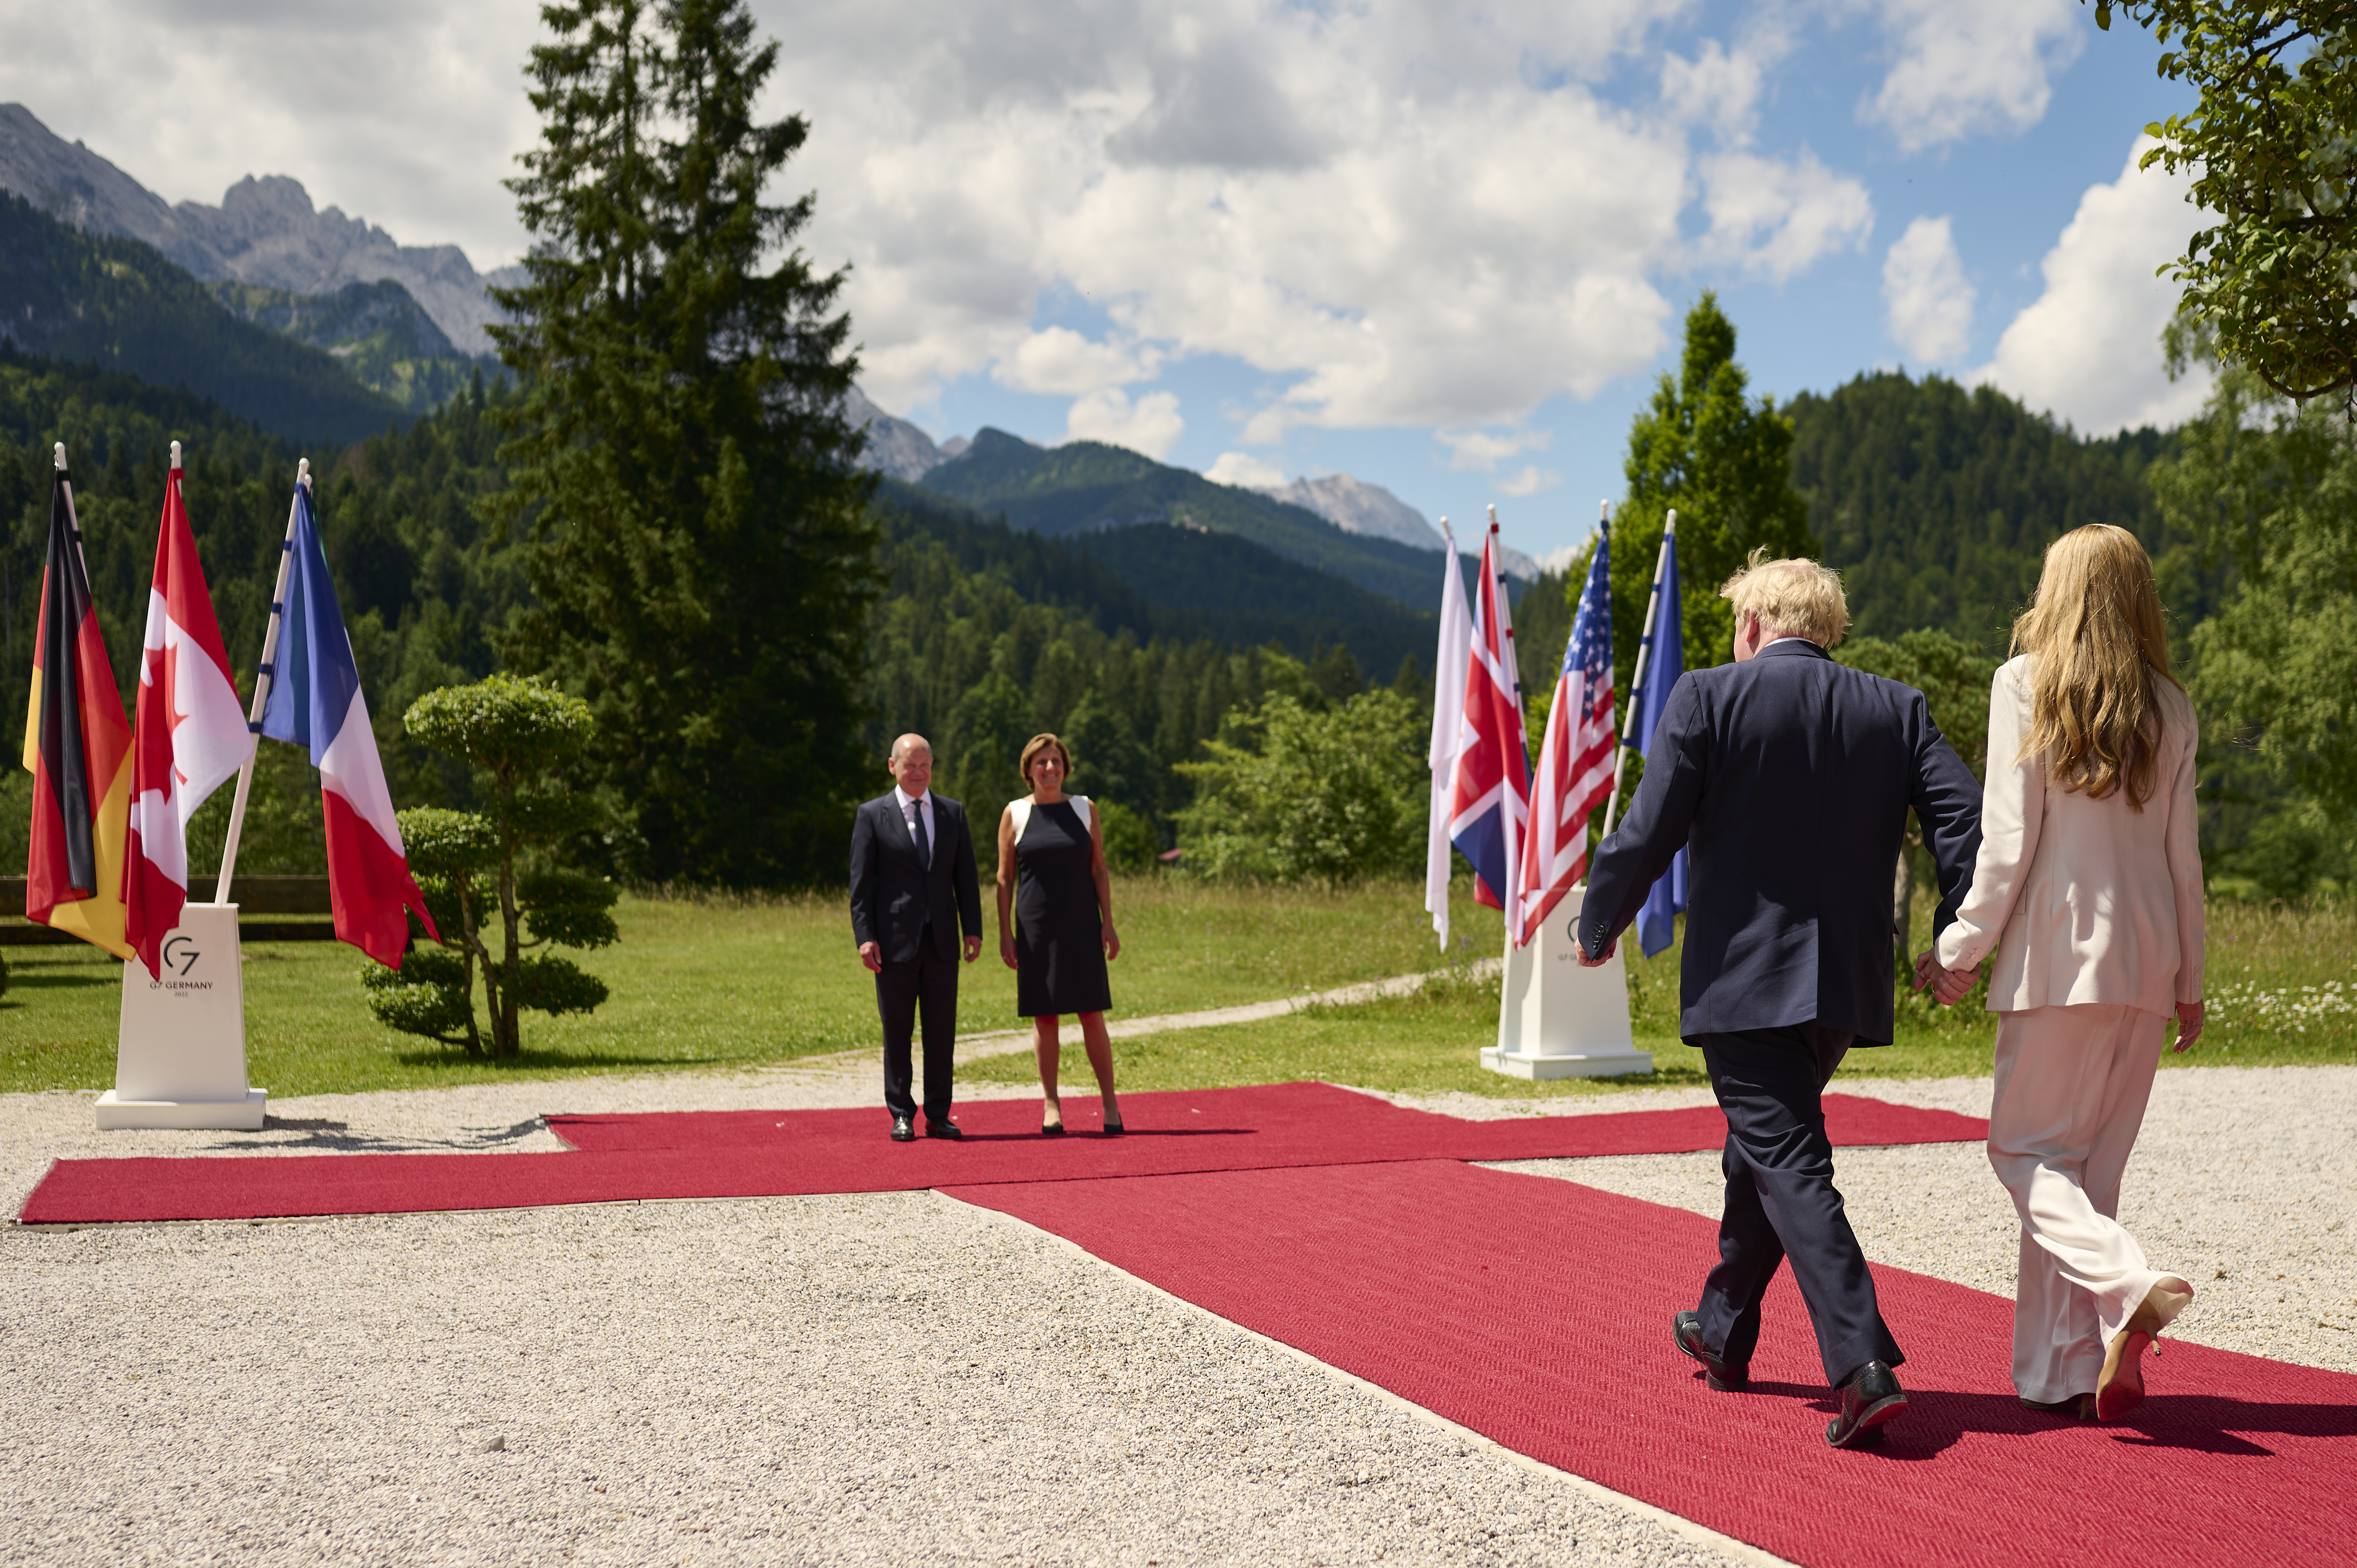 Federal Chancellor Olaf Scholz and his wife Britta Ernst welcome Boris Johnson (UK Prime Minister) and his wife Carrie Johnson to the G7 Summit in Schloss Elmau.